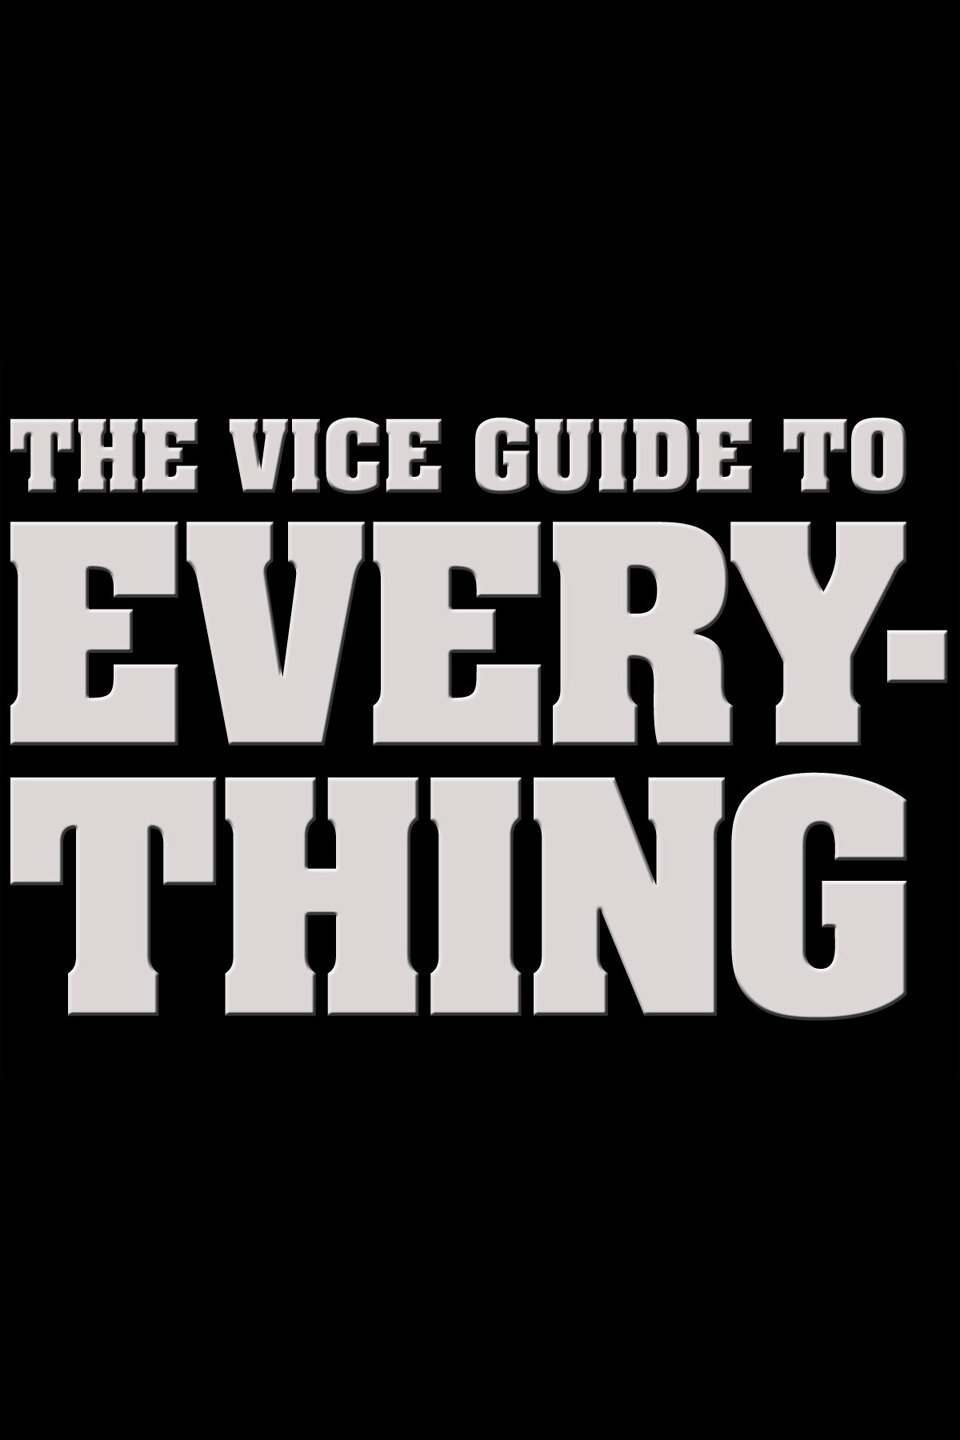 The Vice Guide to Everything ne zaman